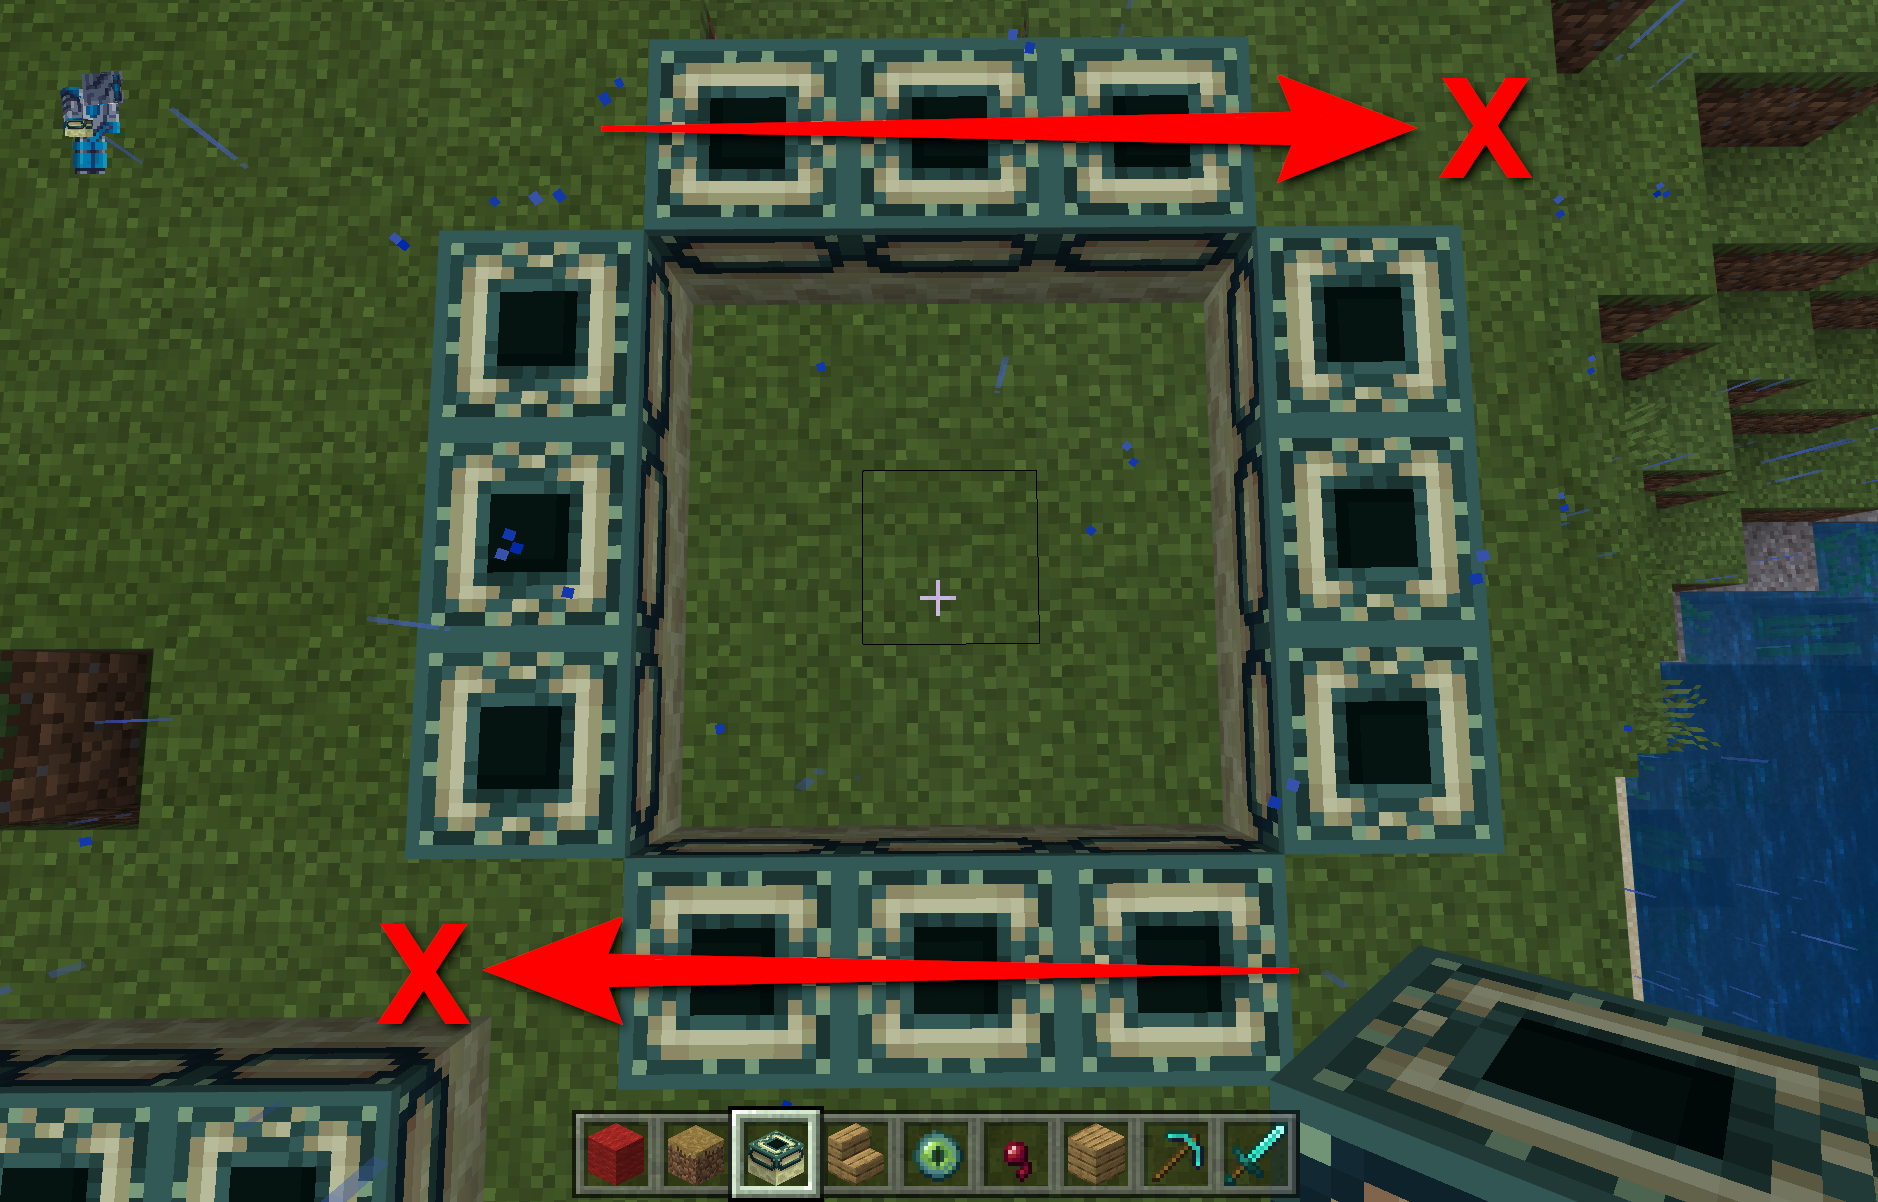 How to make an End Portal in Minecraft (PC/XBOX/PS4) 